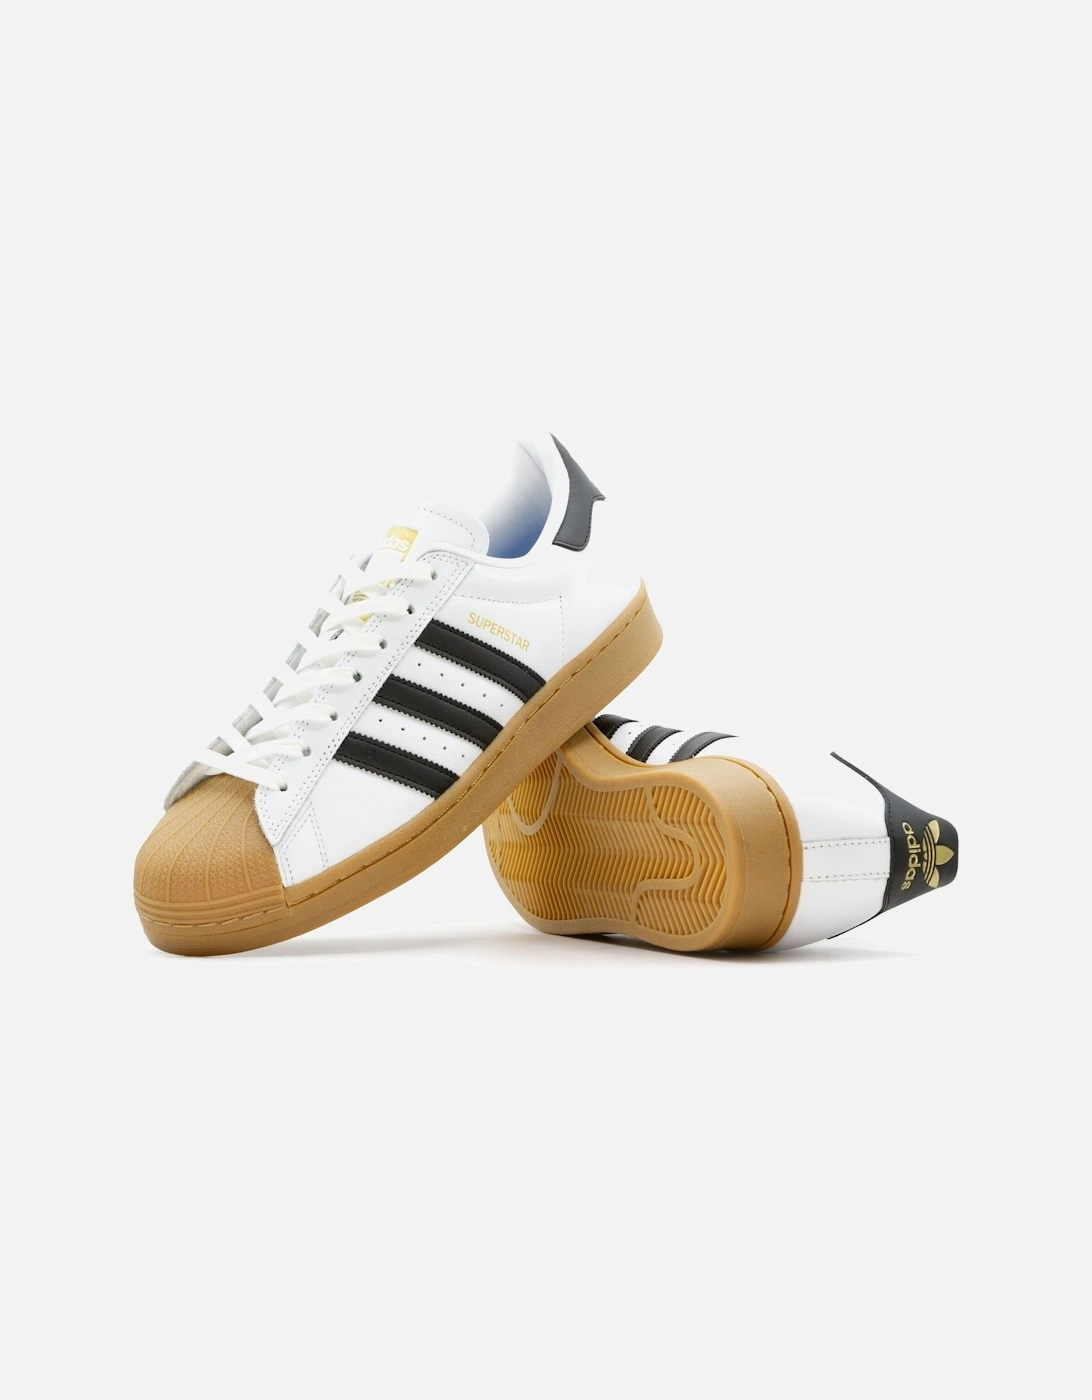 Superstar ADV Shoes - FTW White/Core Black/Gum4, 6 of 5